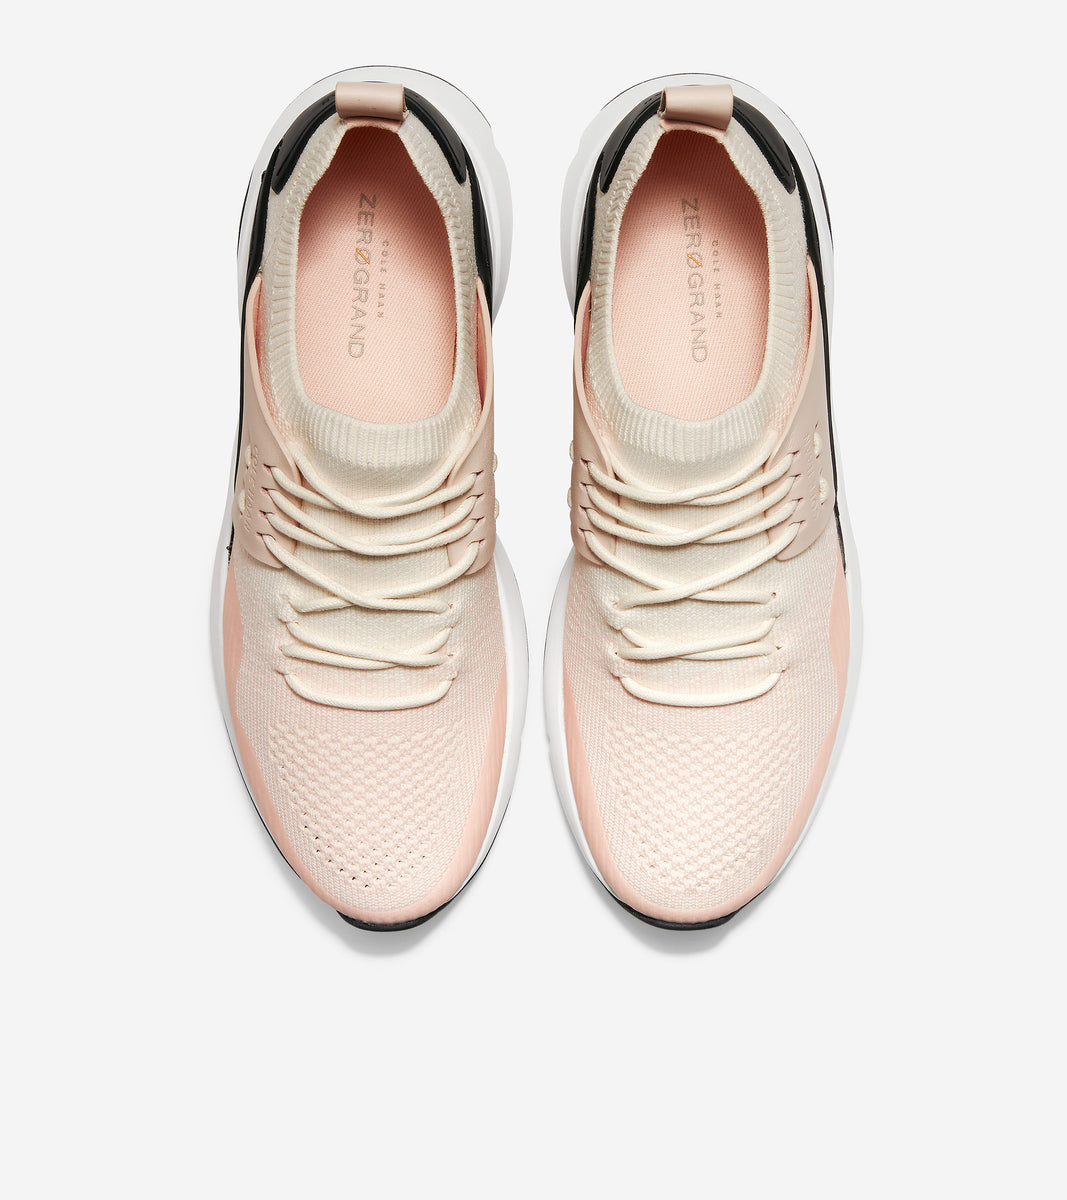 ColeHaan-ZERØGRAND All-Day Trainer-w18361-Ivory-Peach Blush